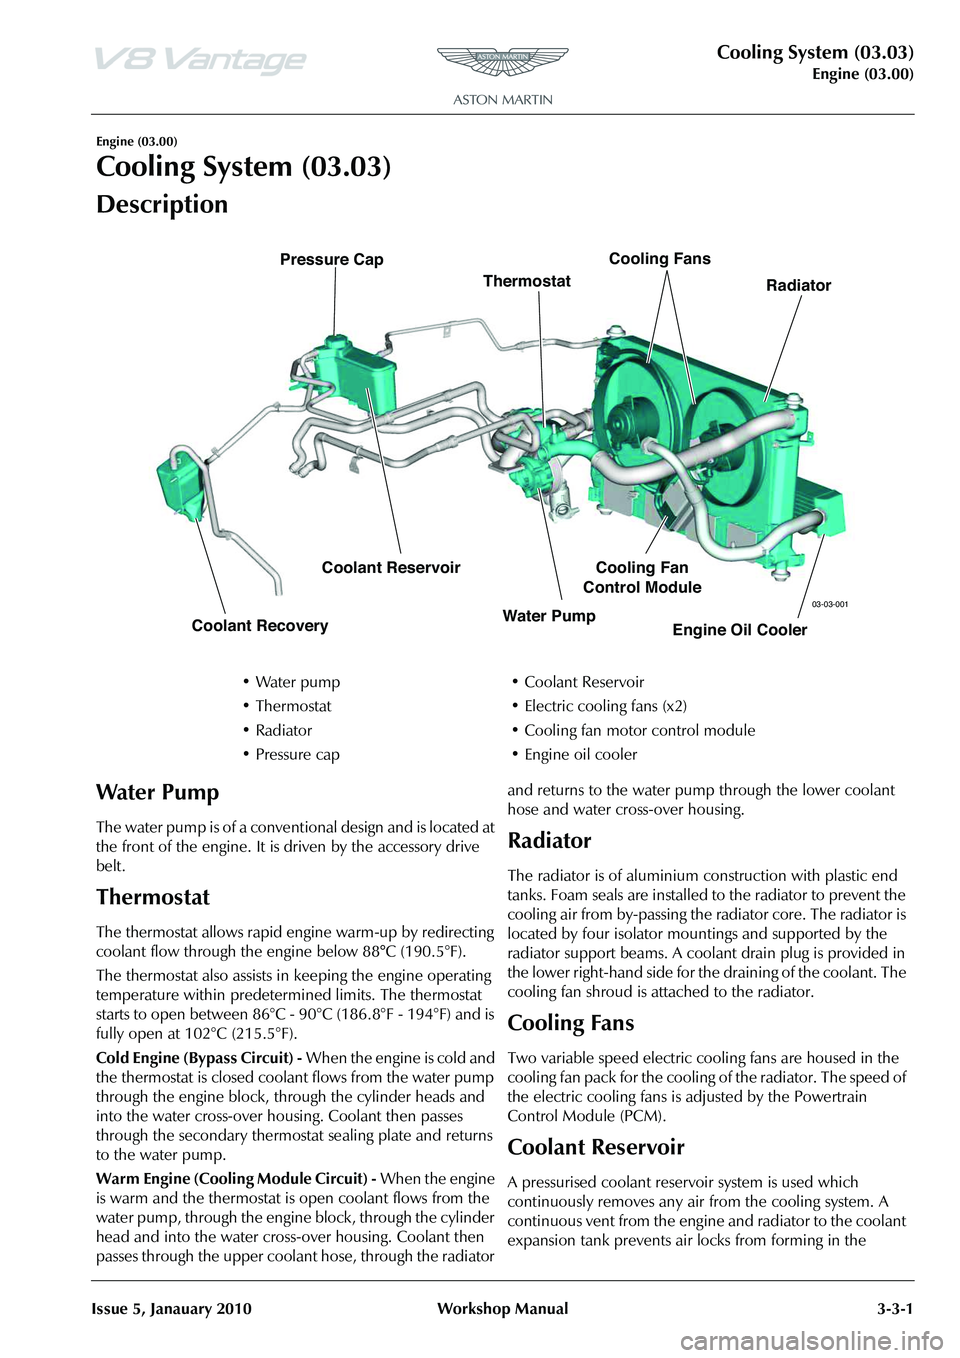 ASTON MARTIN V8 VANTAGE 2010  Workshop Manual Cooling System (03.03)
Engine (03.00)
Issue 5, Janauary 2010 Workshop Manual 3-3-1
Engine (03.00)
Cooling System (03.03)
Description
The water pump is of a conventional design and is located at 
the f